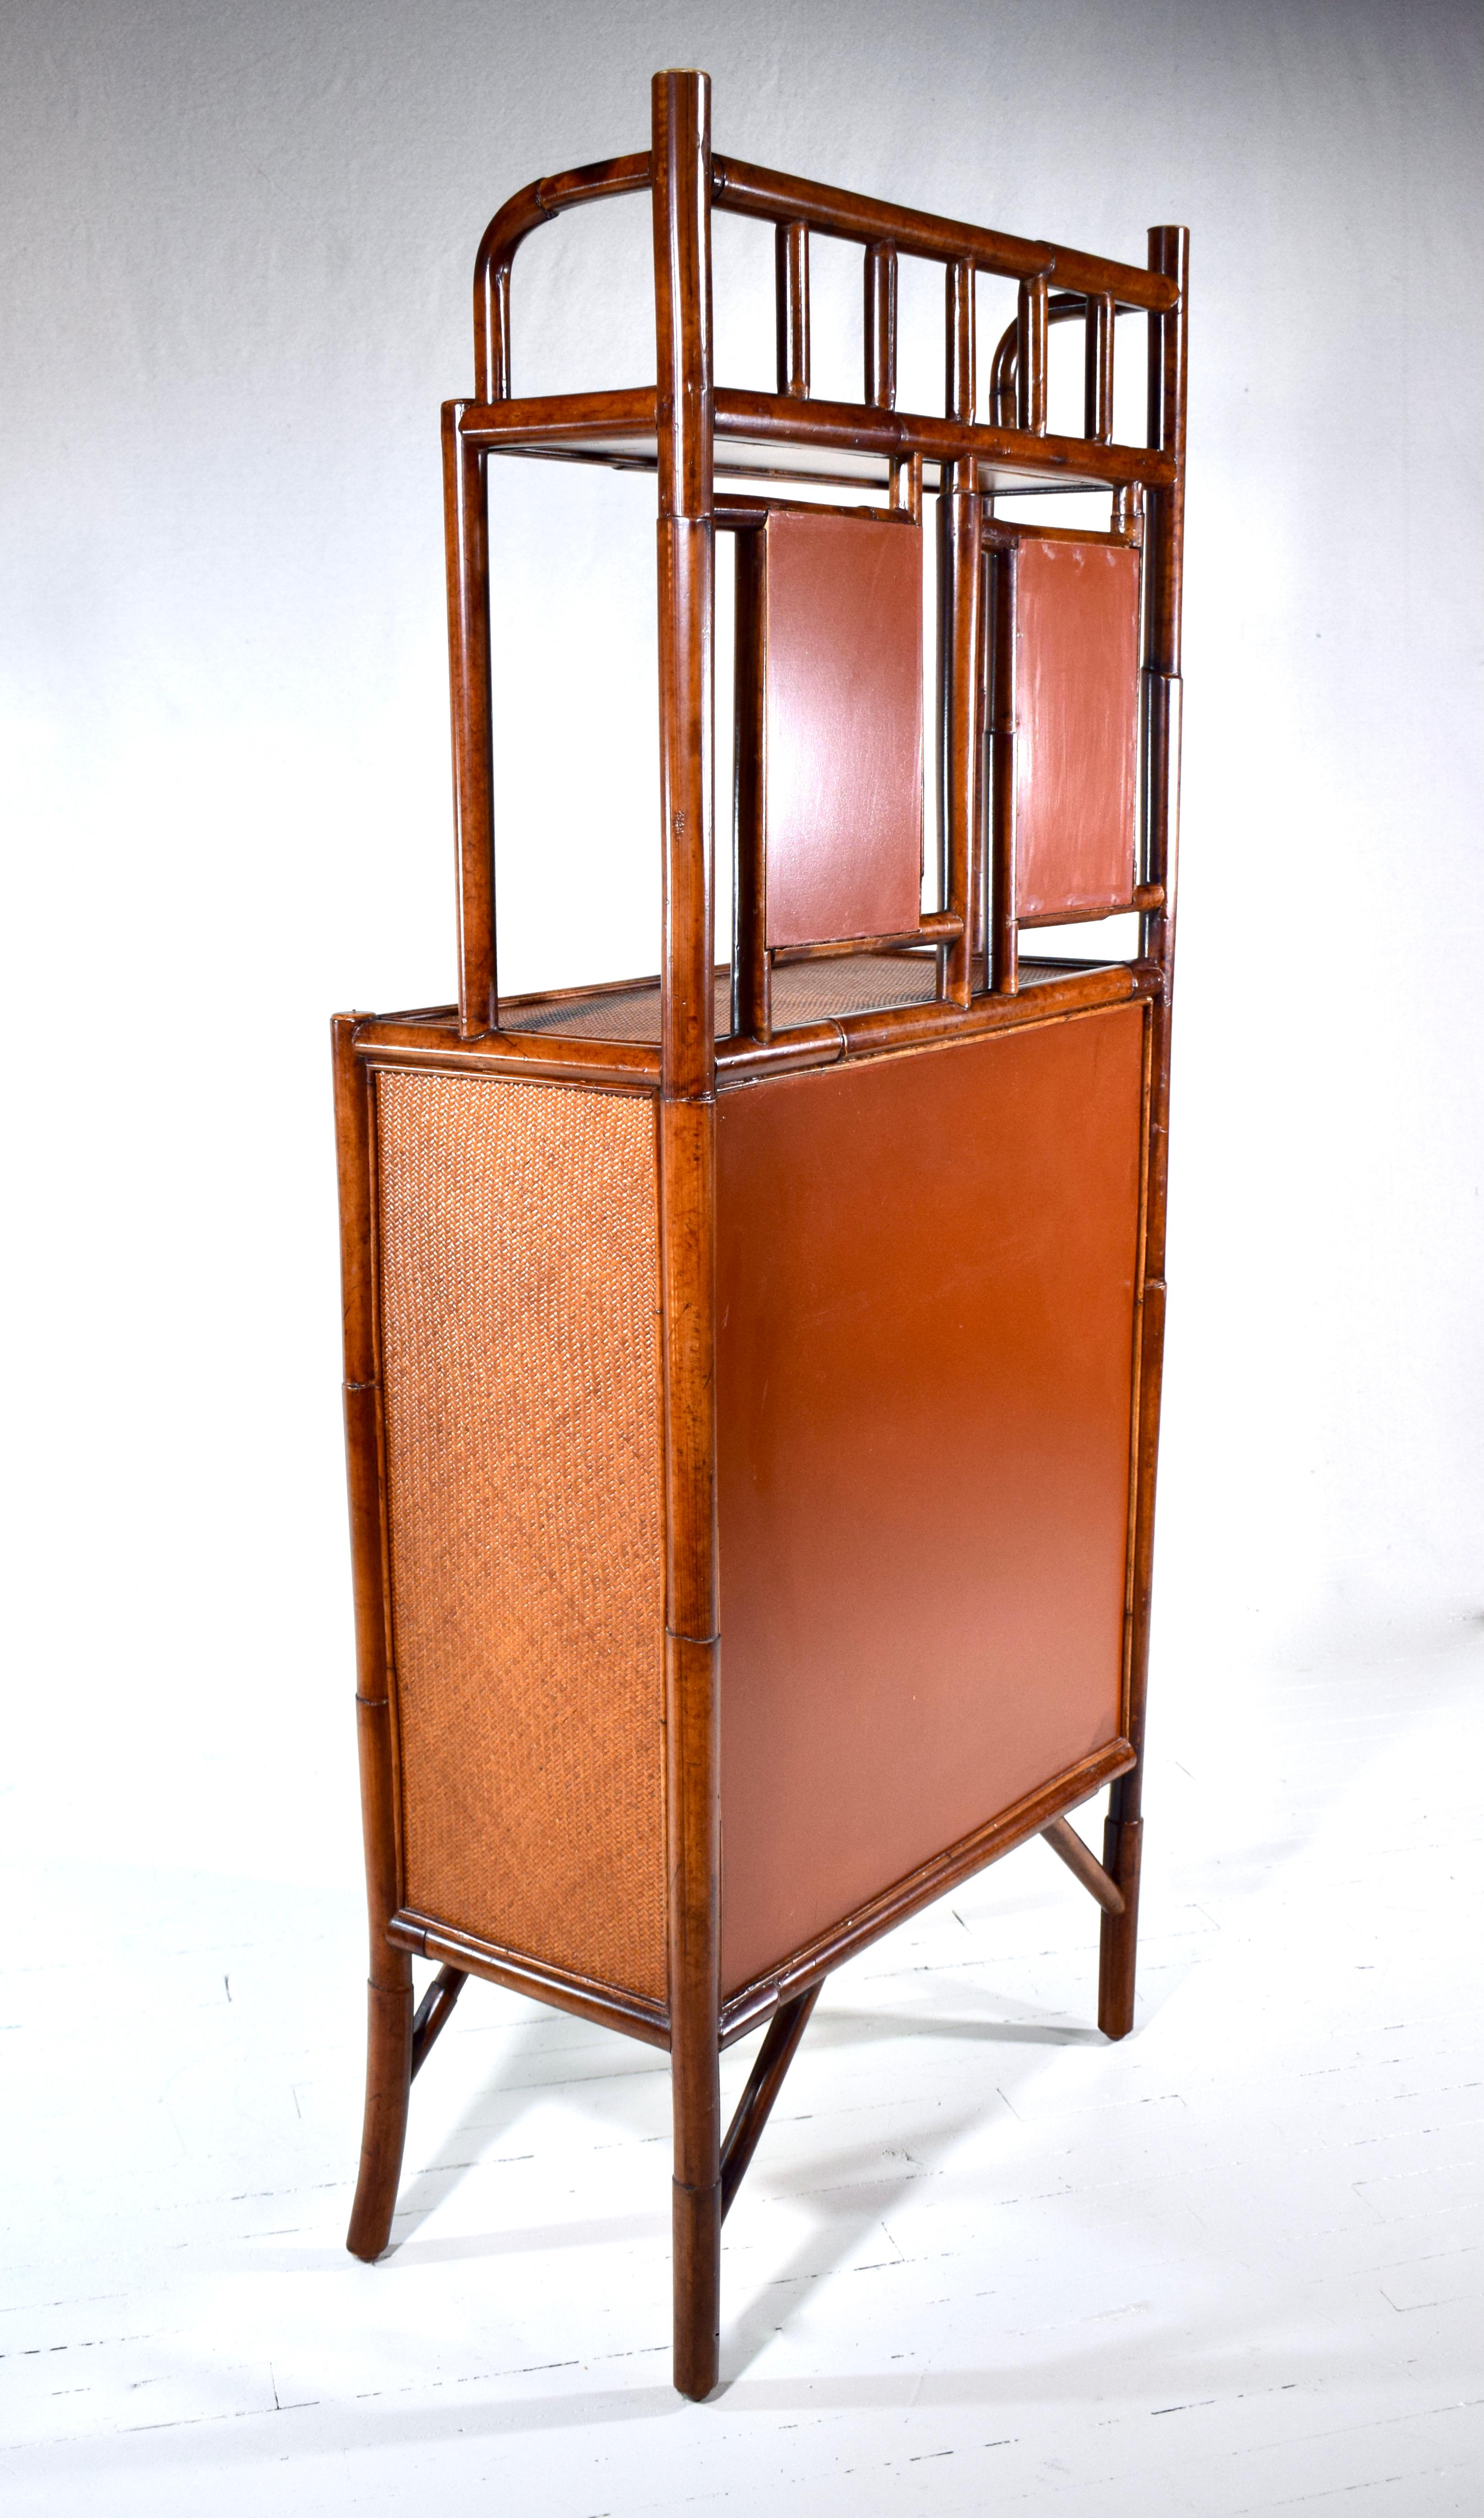 British Colonial Style Faux Bamboo Grasscloth Etagere In Good Condition For Sale In Southampton, NJ